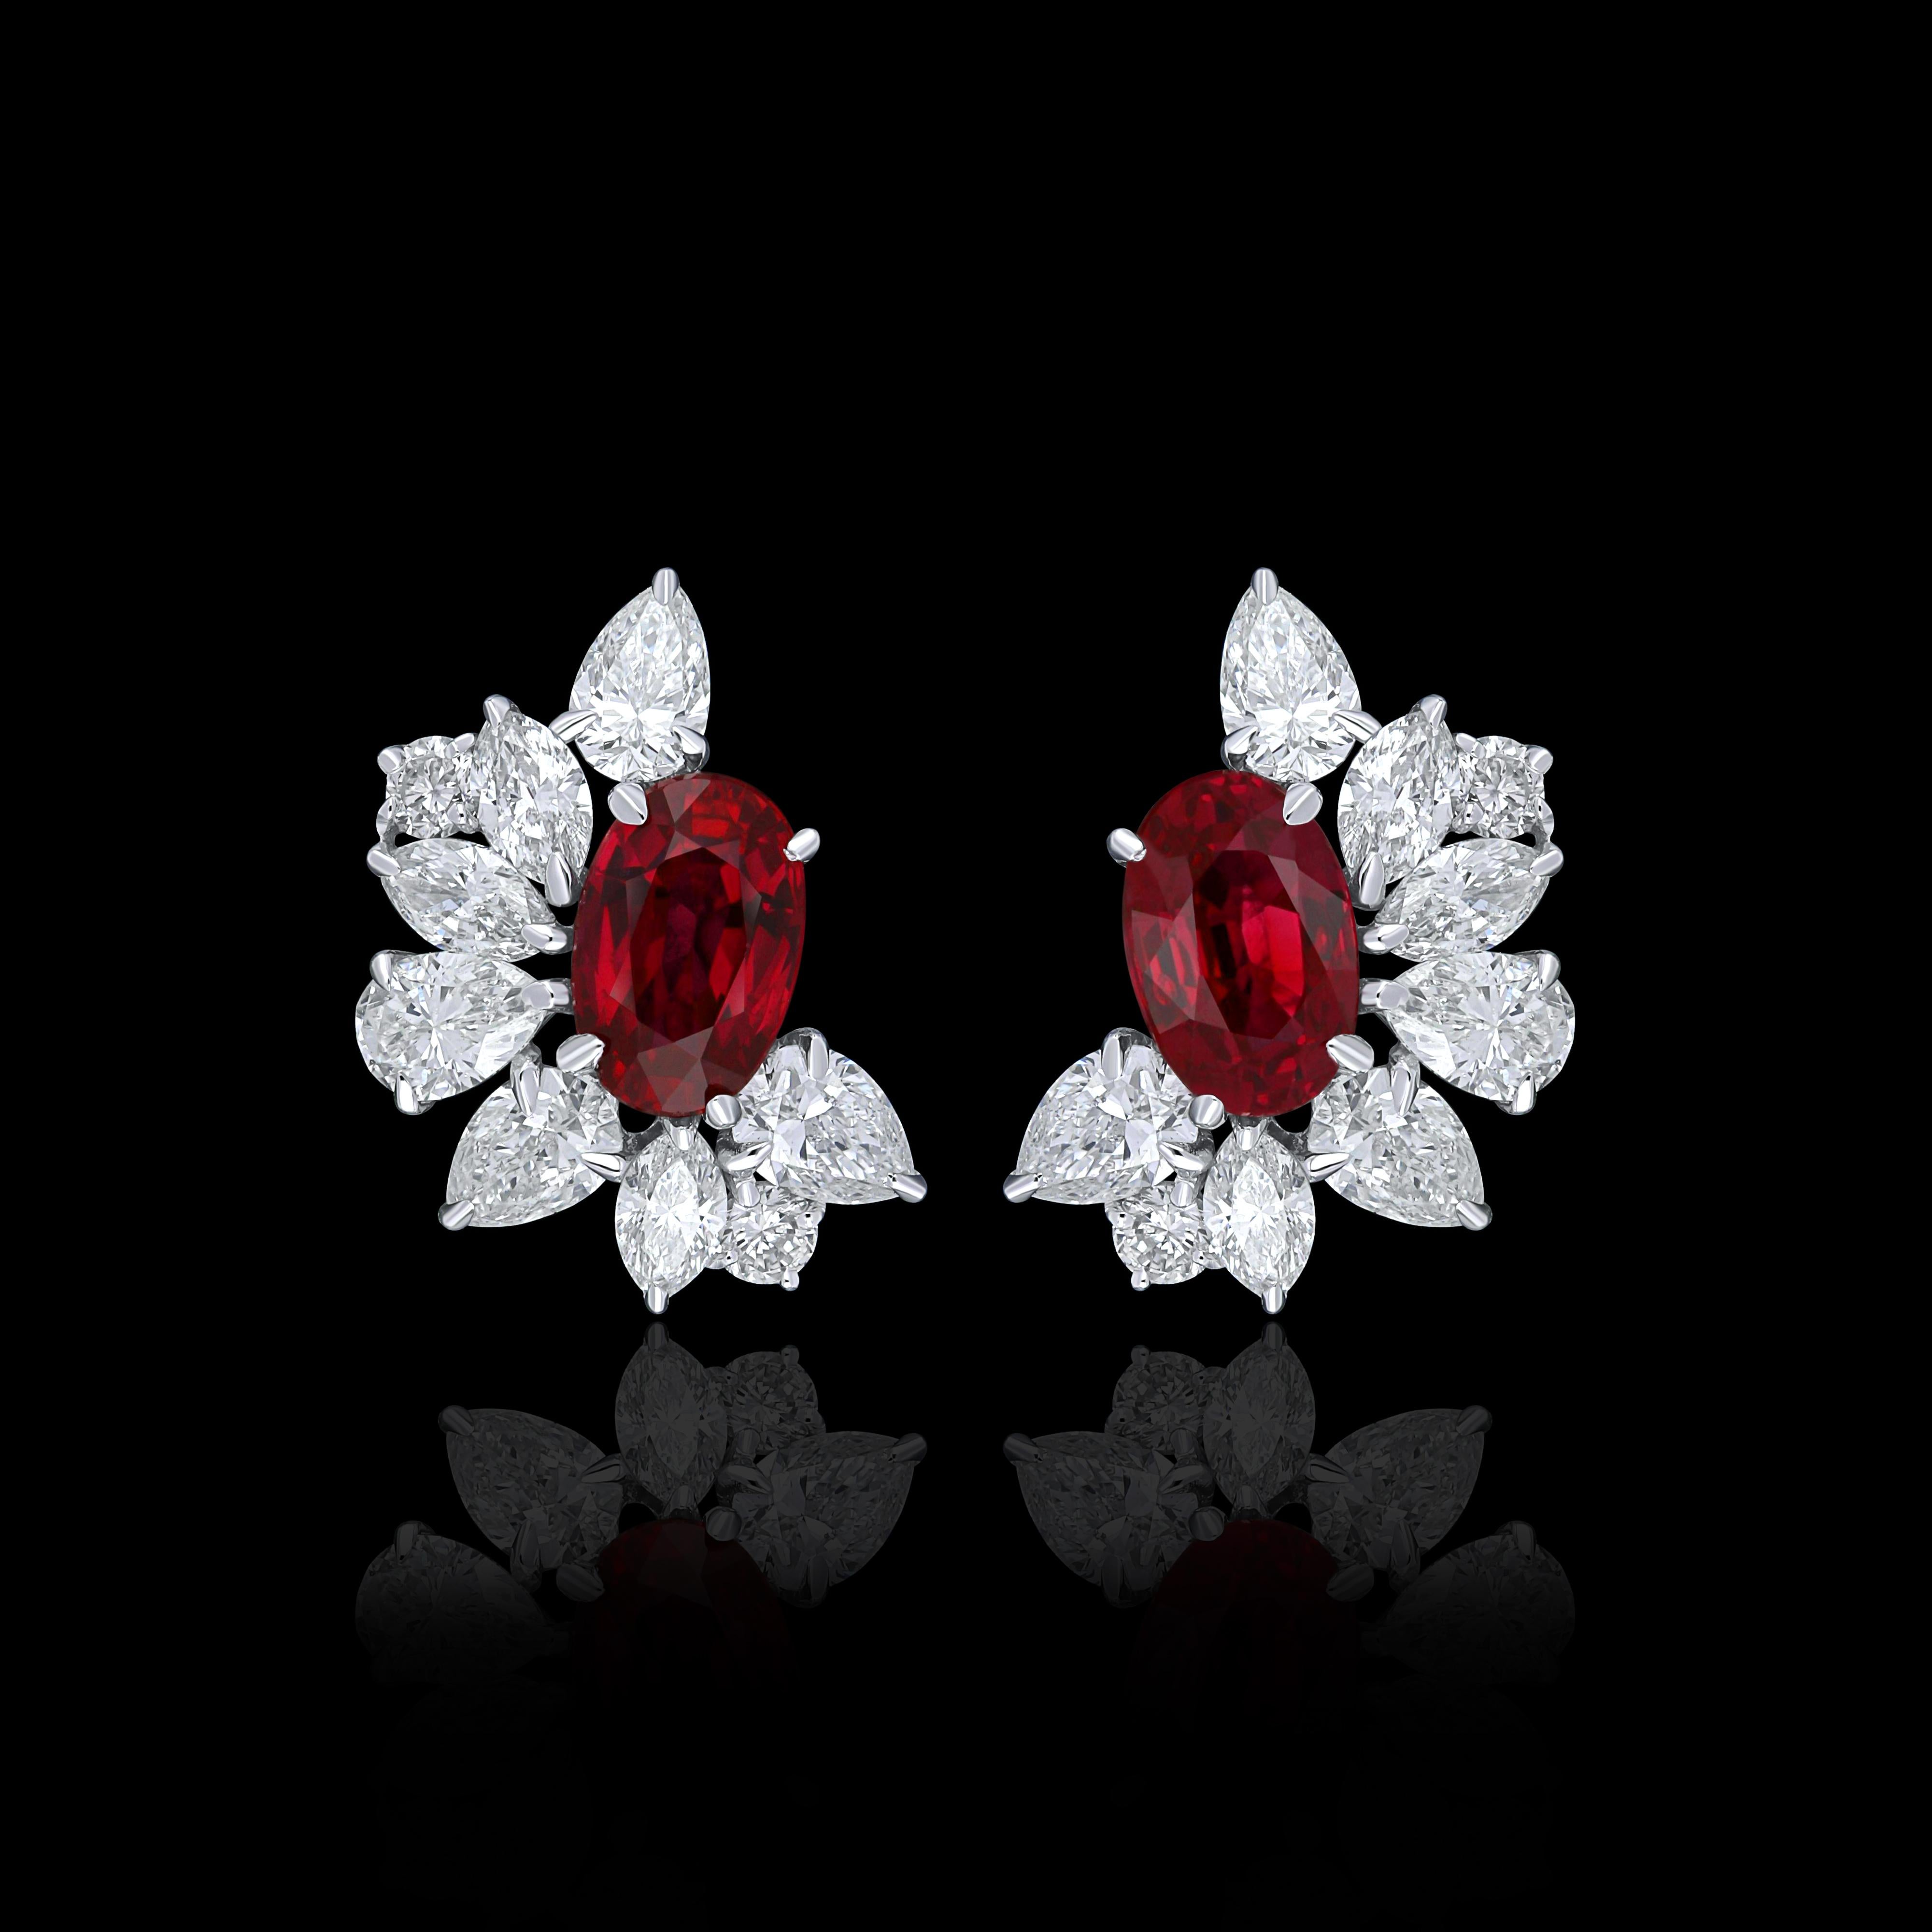 Elegant and exquisitely detailed 18 Karat White Gold Earring, center set with 1.28Cts .Oval Shape Mozambique Ruby  and micro pave set Diamonds, weighing approx. 1.30Cts Beautifully Hand crafted in 18 Karat White Gold.

Stone Detail:
Ruby Mozambique: